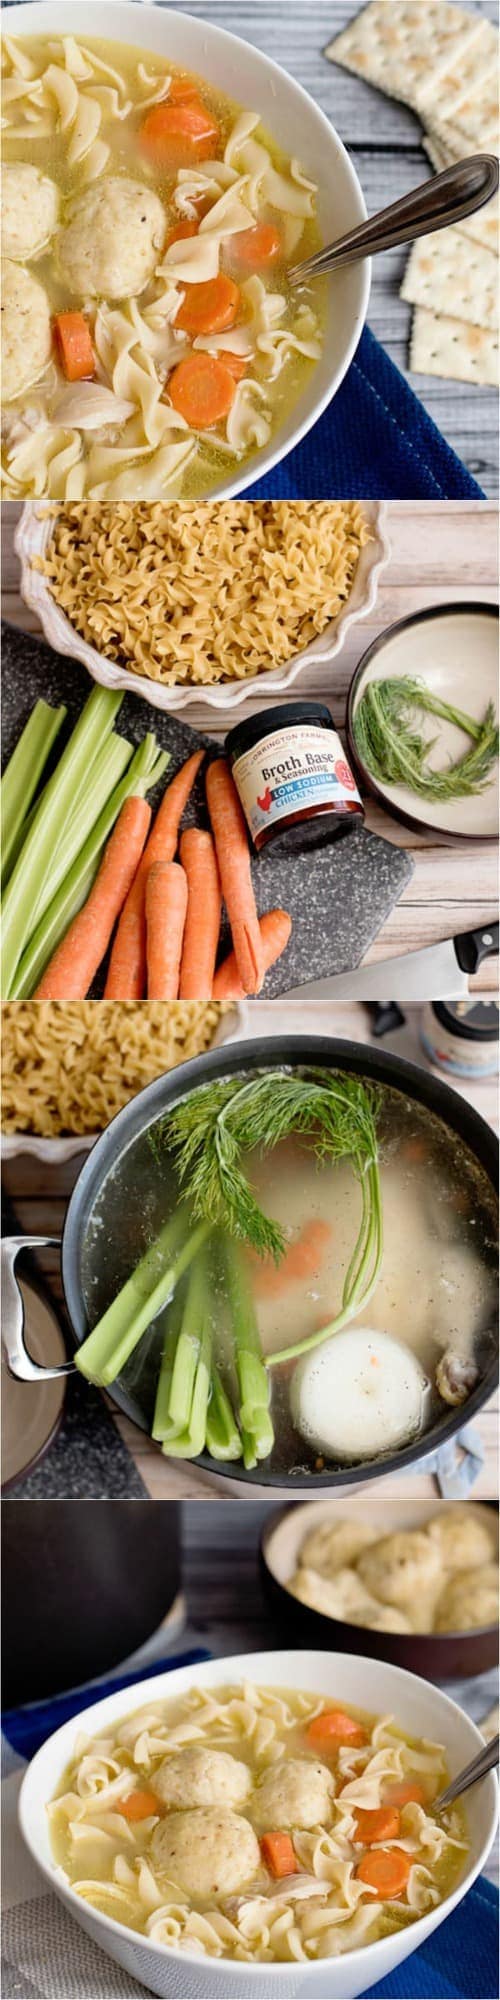 How to make Homemade Chicken Noodle Soup